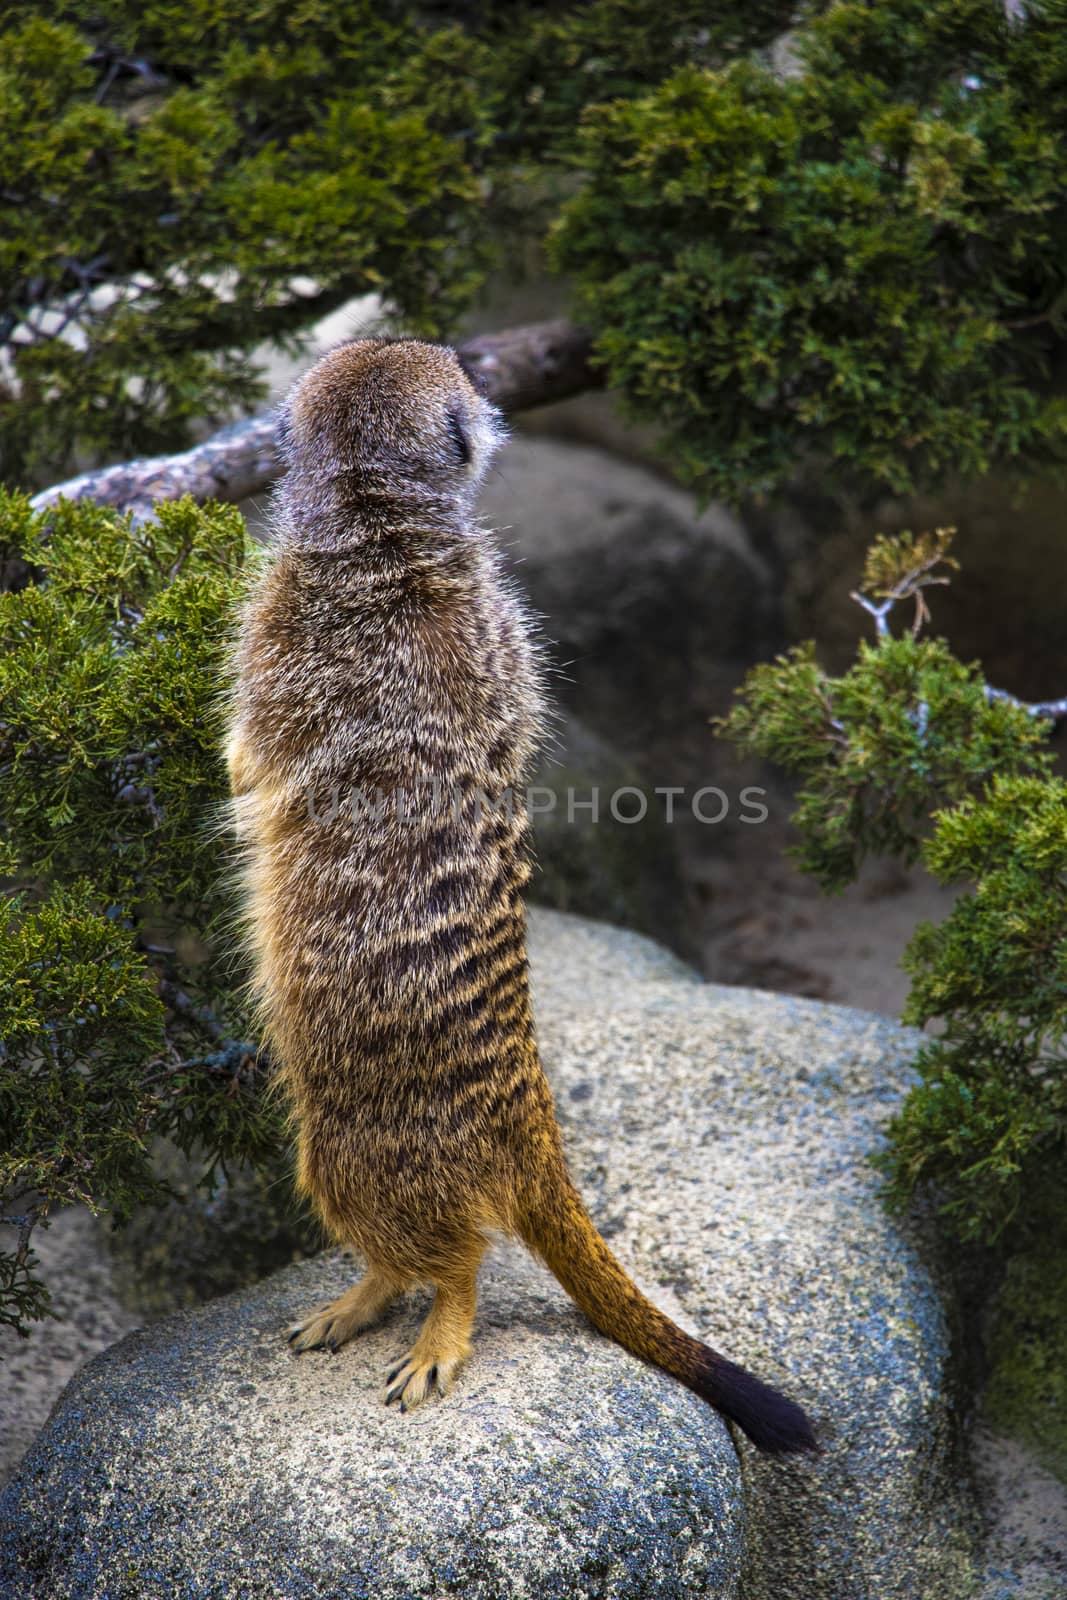 Meerkat stands on its hind legs and looks up